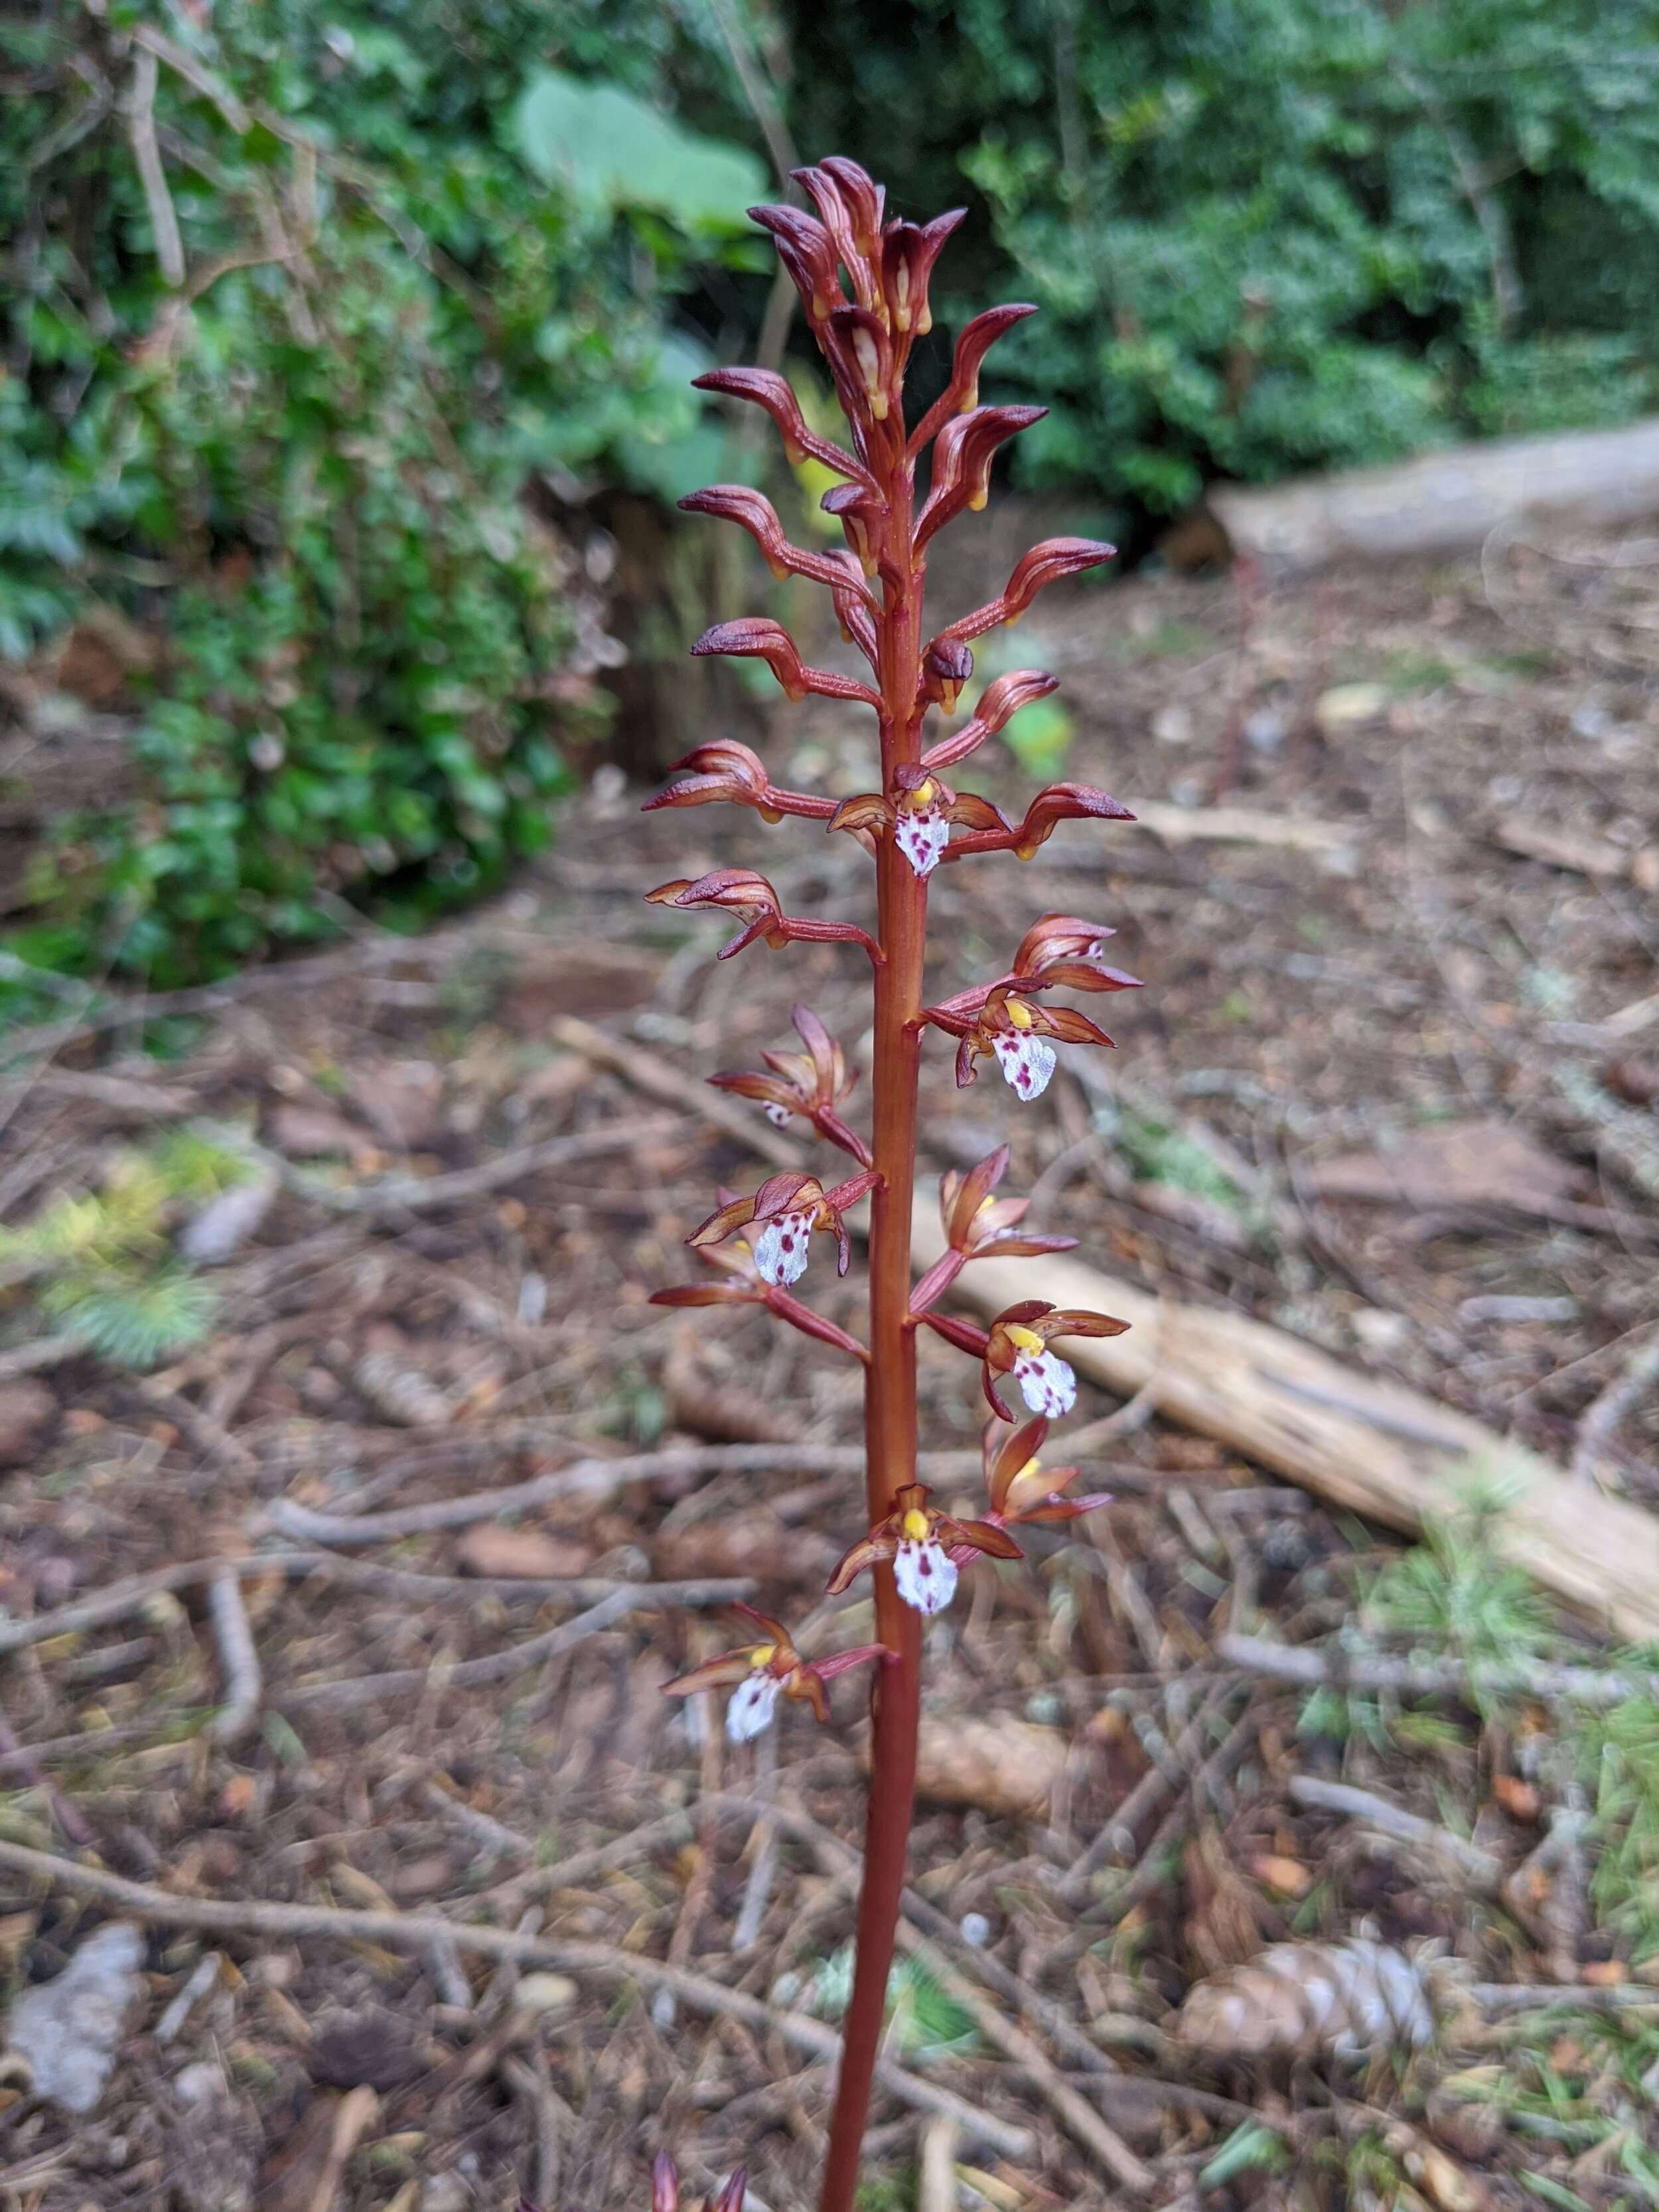 Coralroot